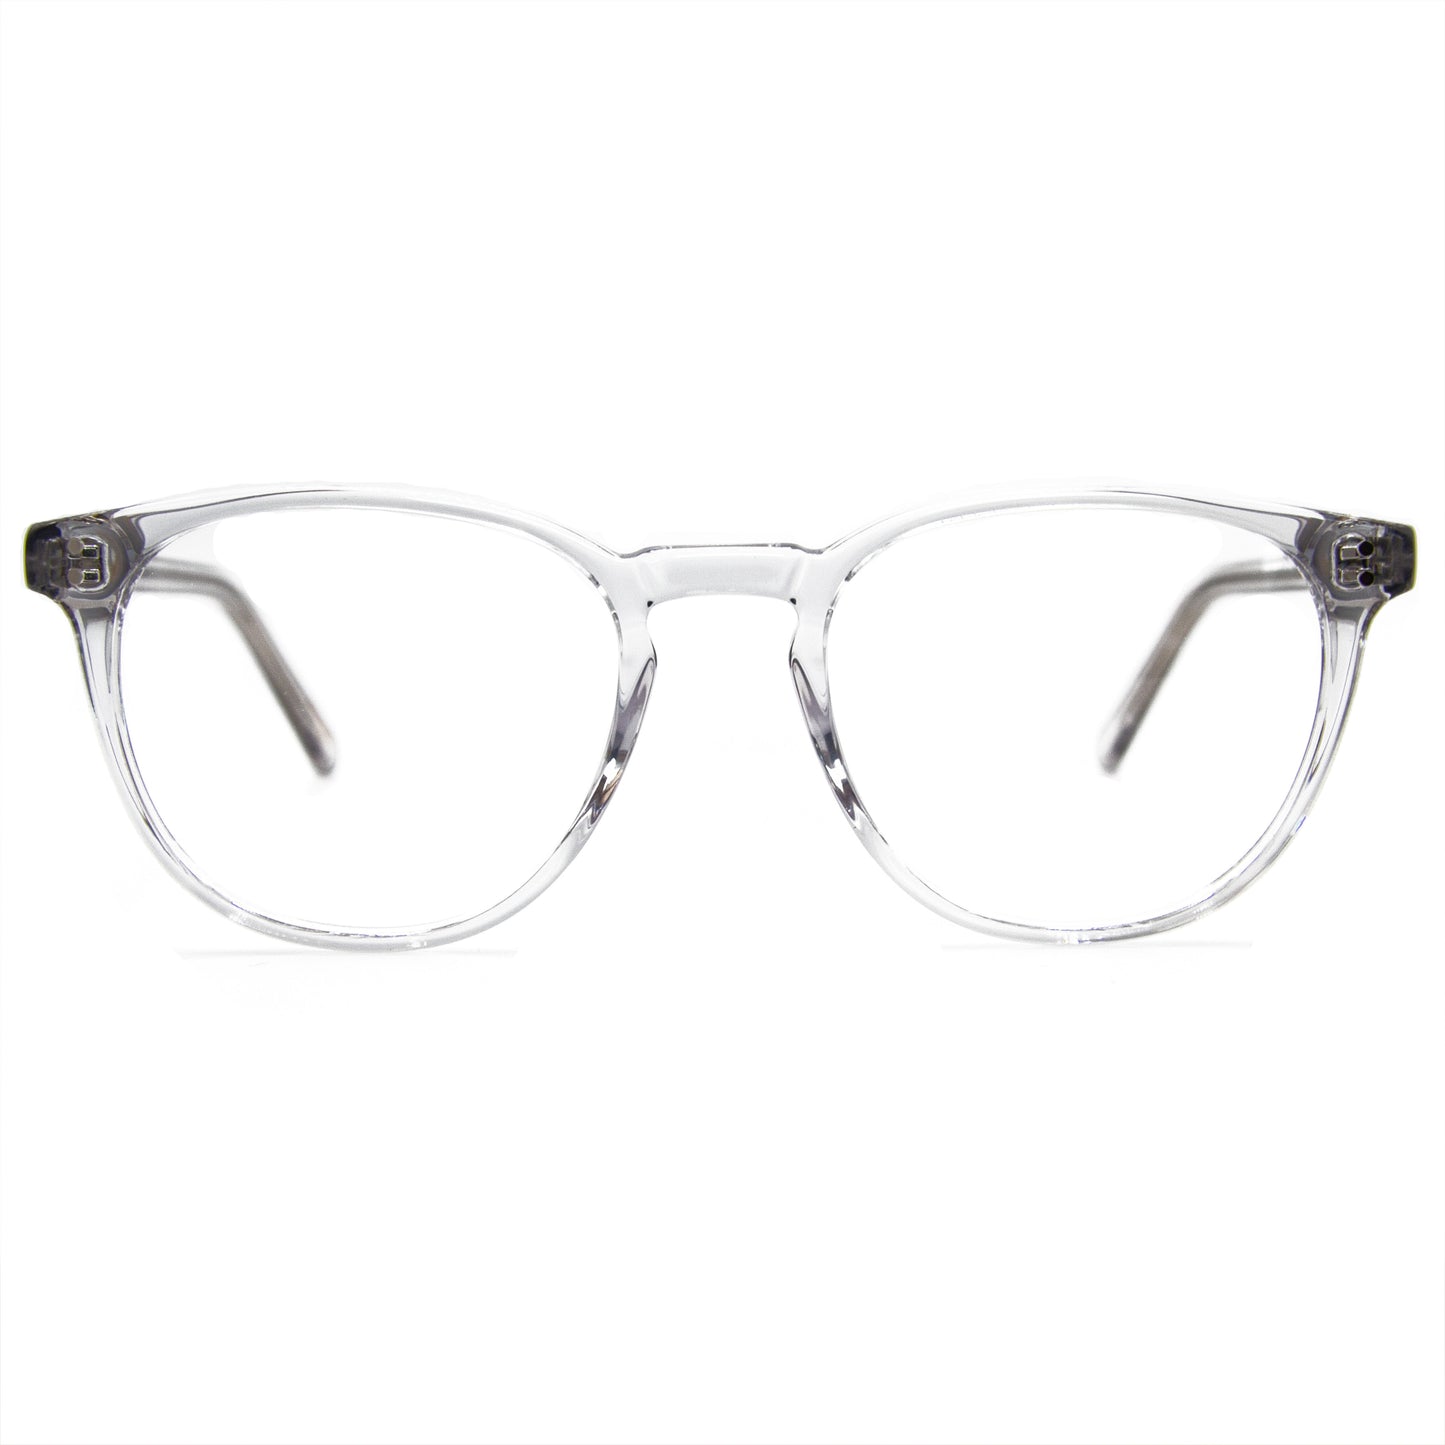  3 brothers - Ant - Crystal - Prescription Glasses